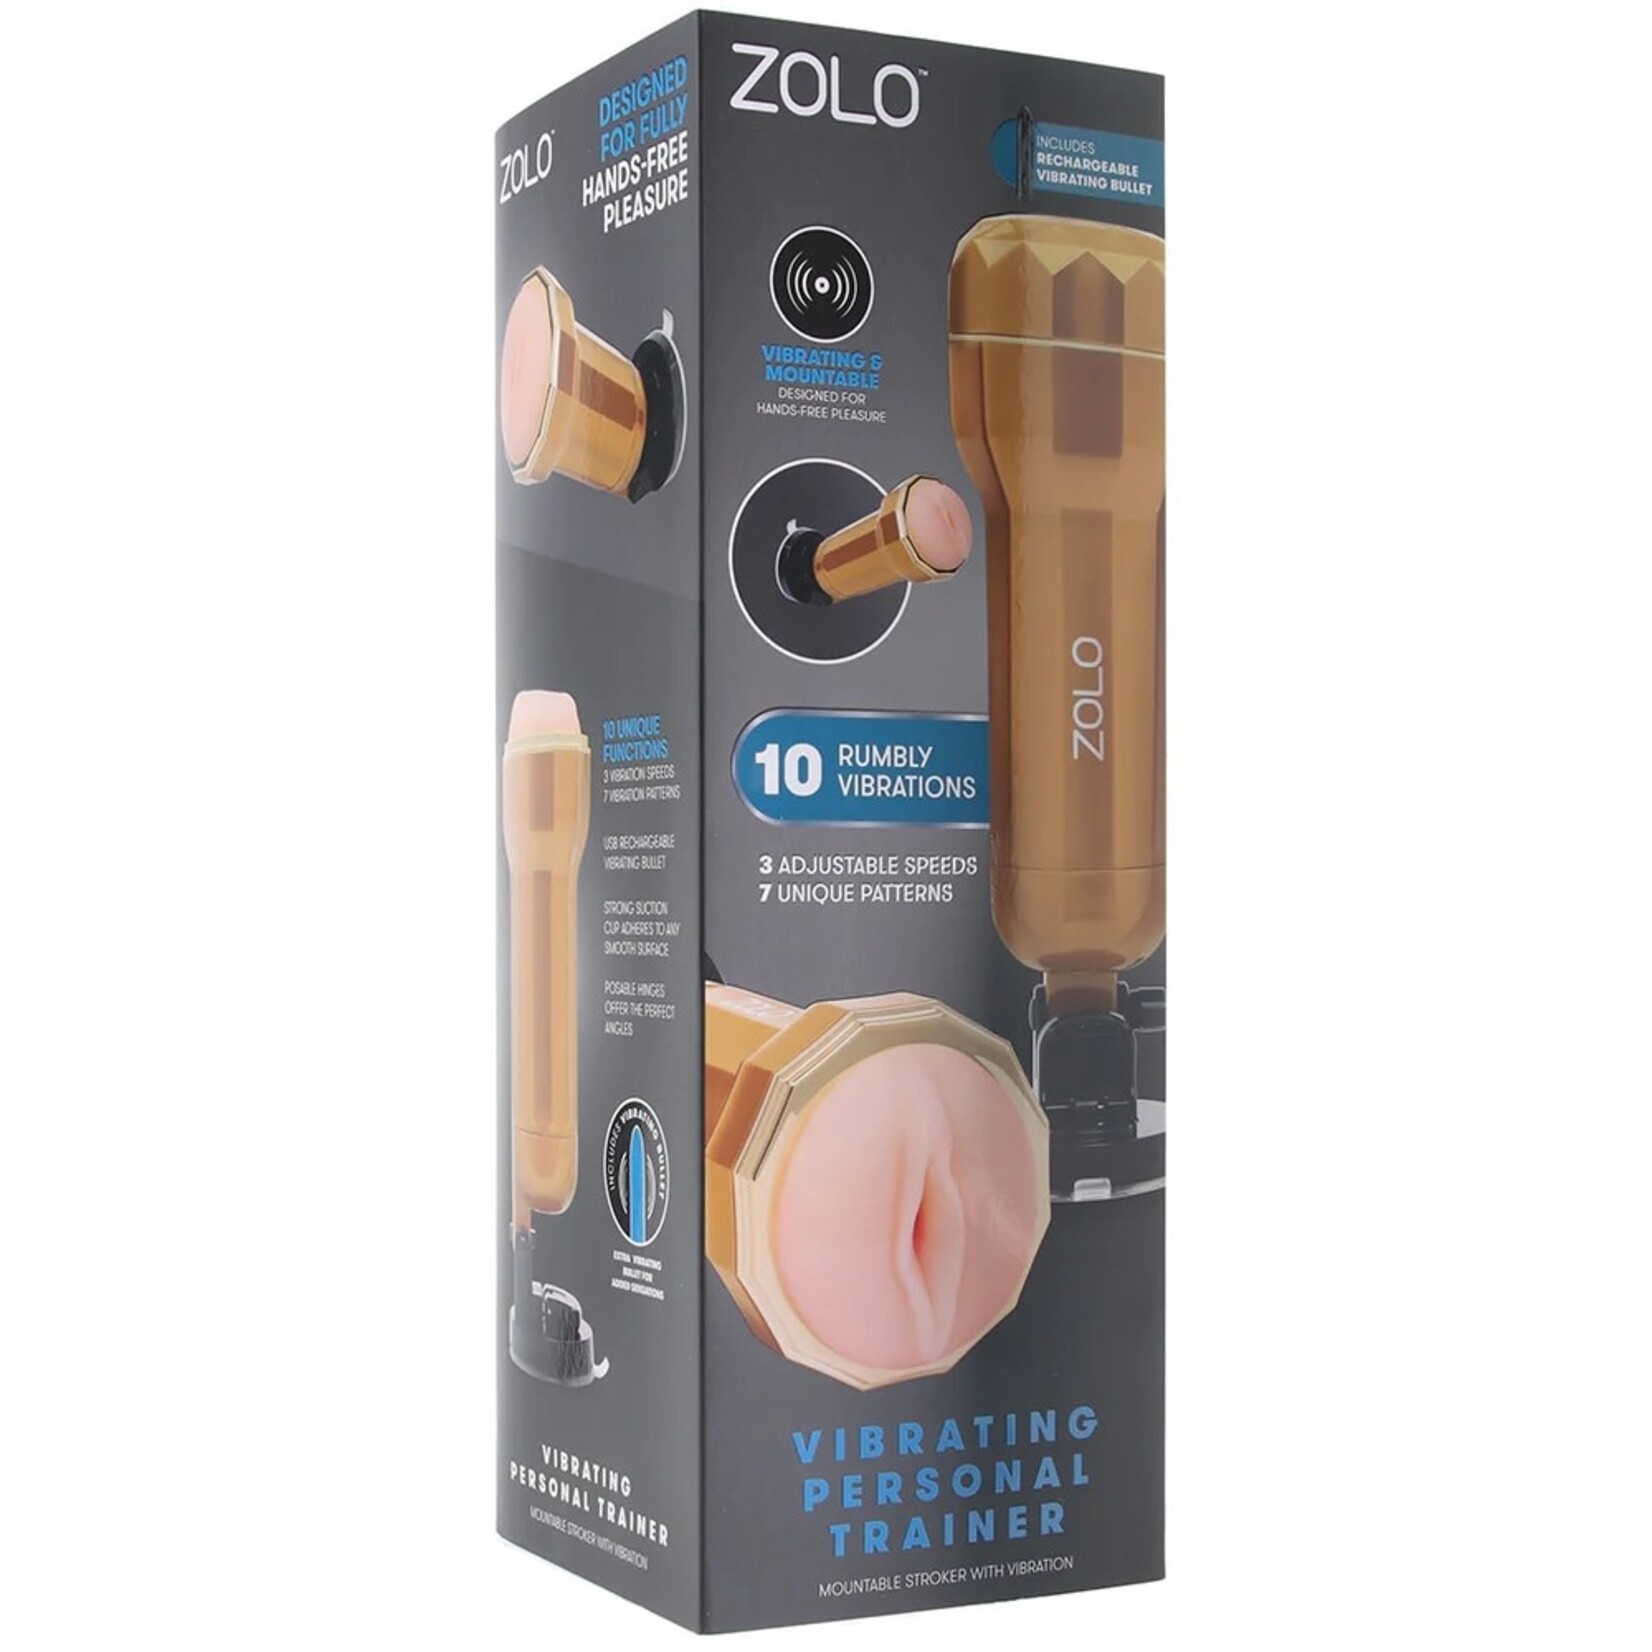 ZOLO - VIBRATING PERSONAL TRAINER MOUNTABLE STROKER